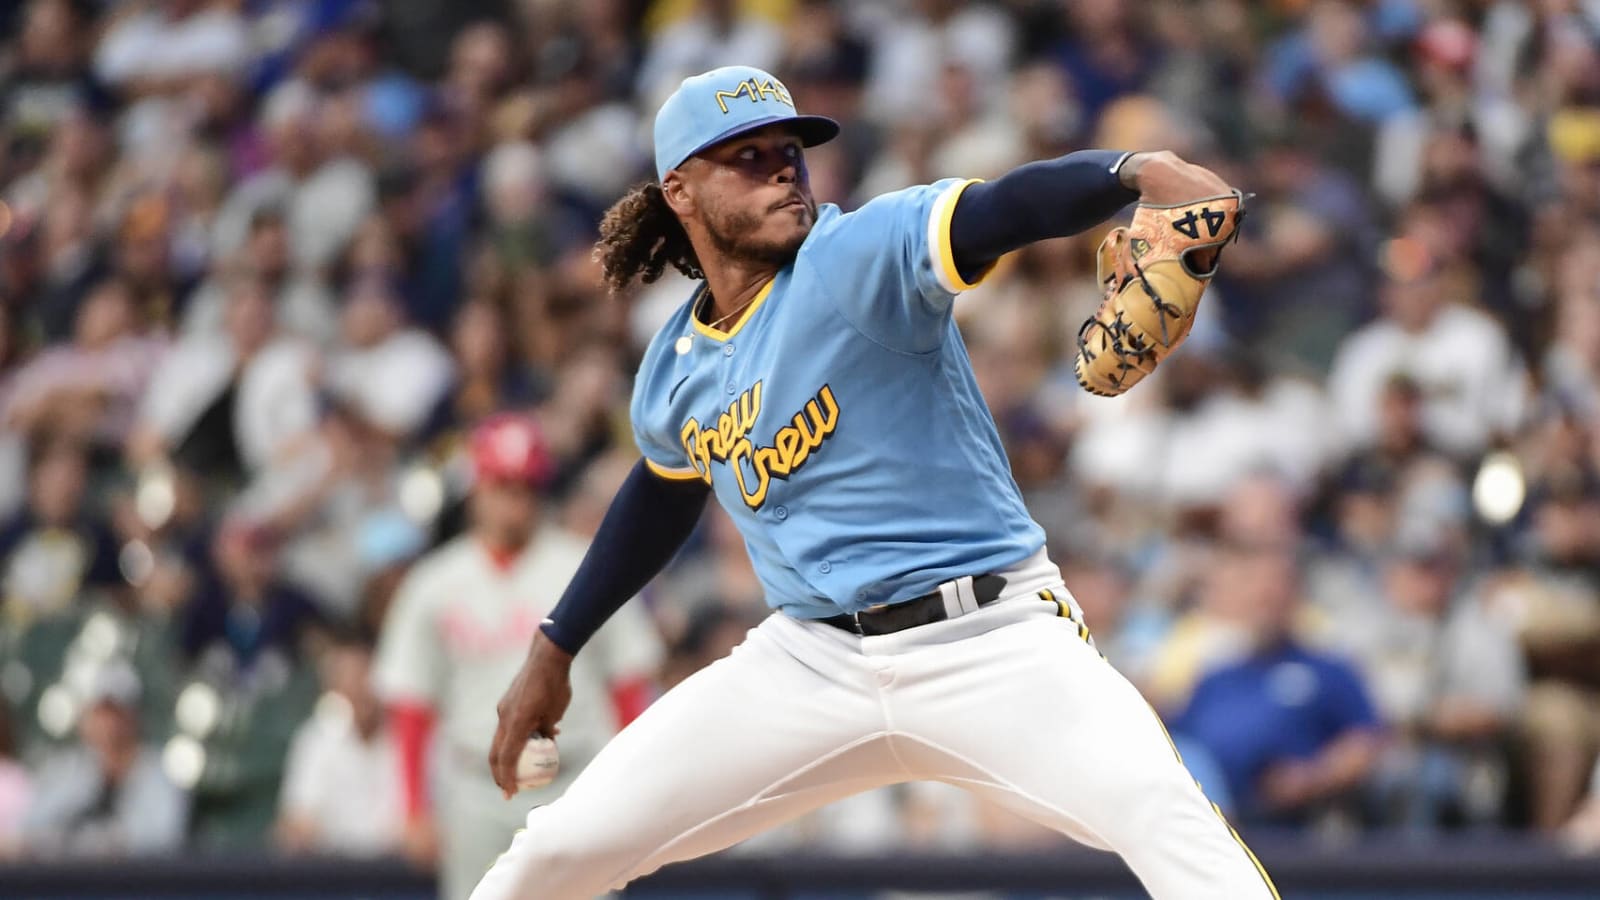 Brewers hurler sets franchise record for strikeouts in seven-game stretch